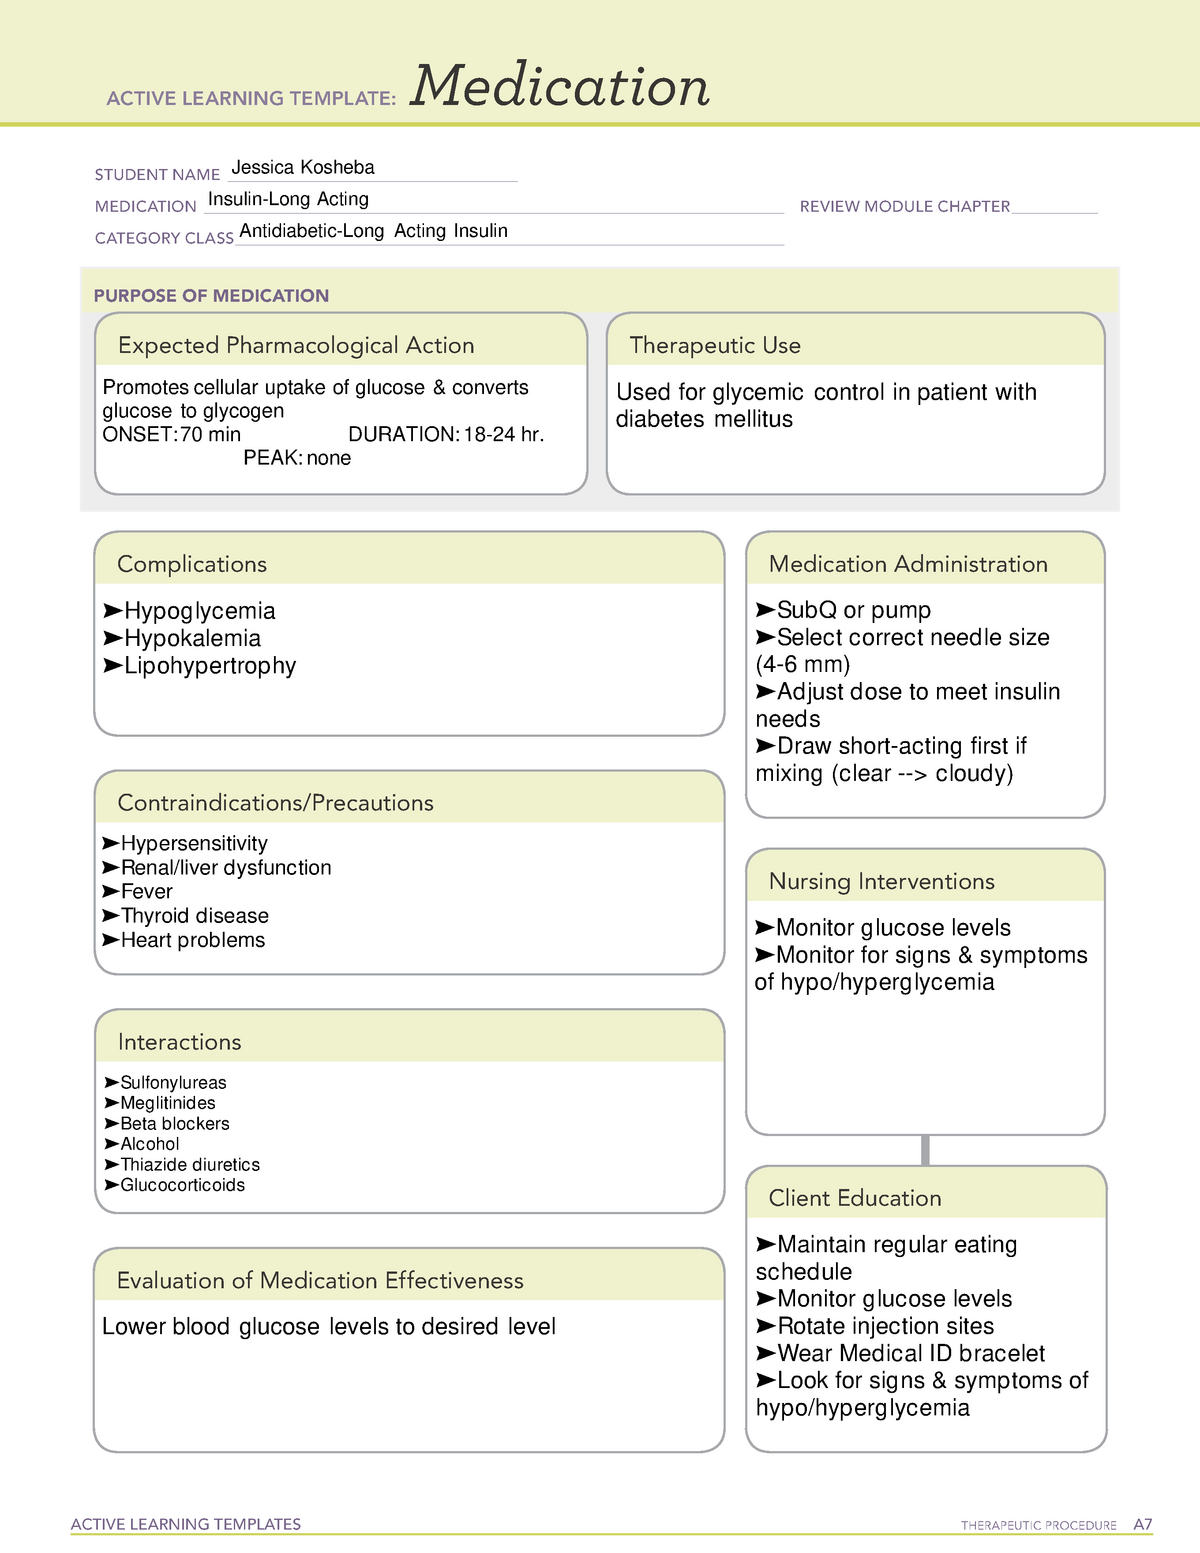 ATI Medication on Long Acting Insulin ACTIVE LEARNING TEMPLATES